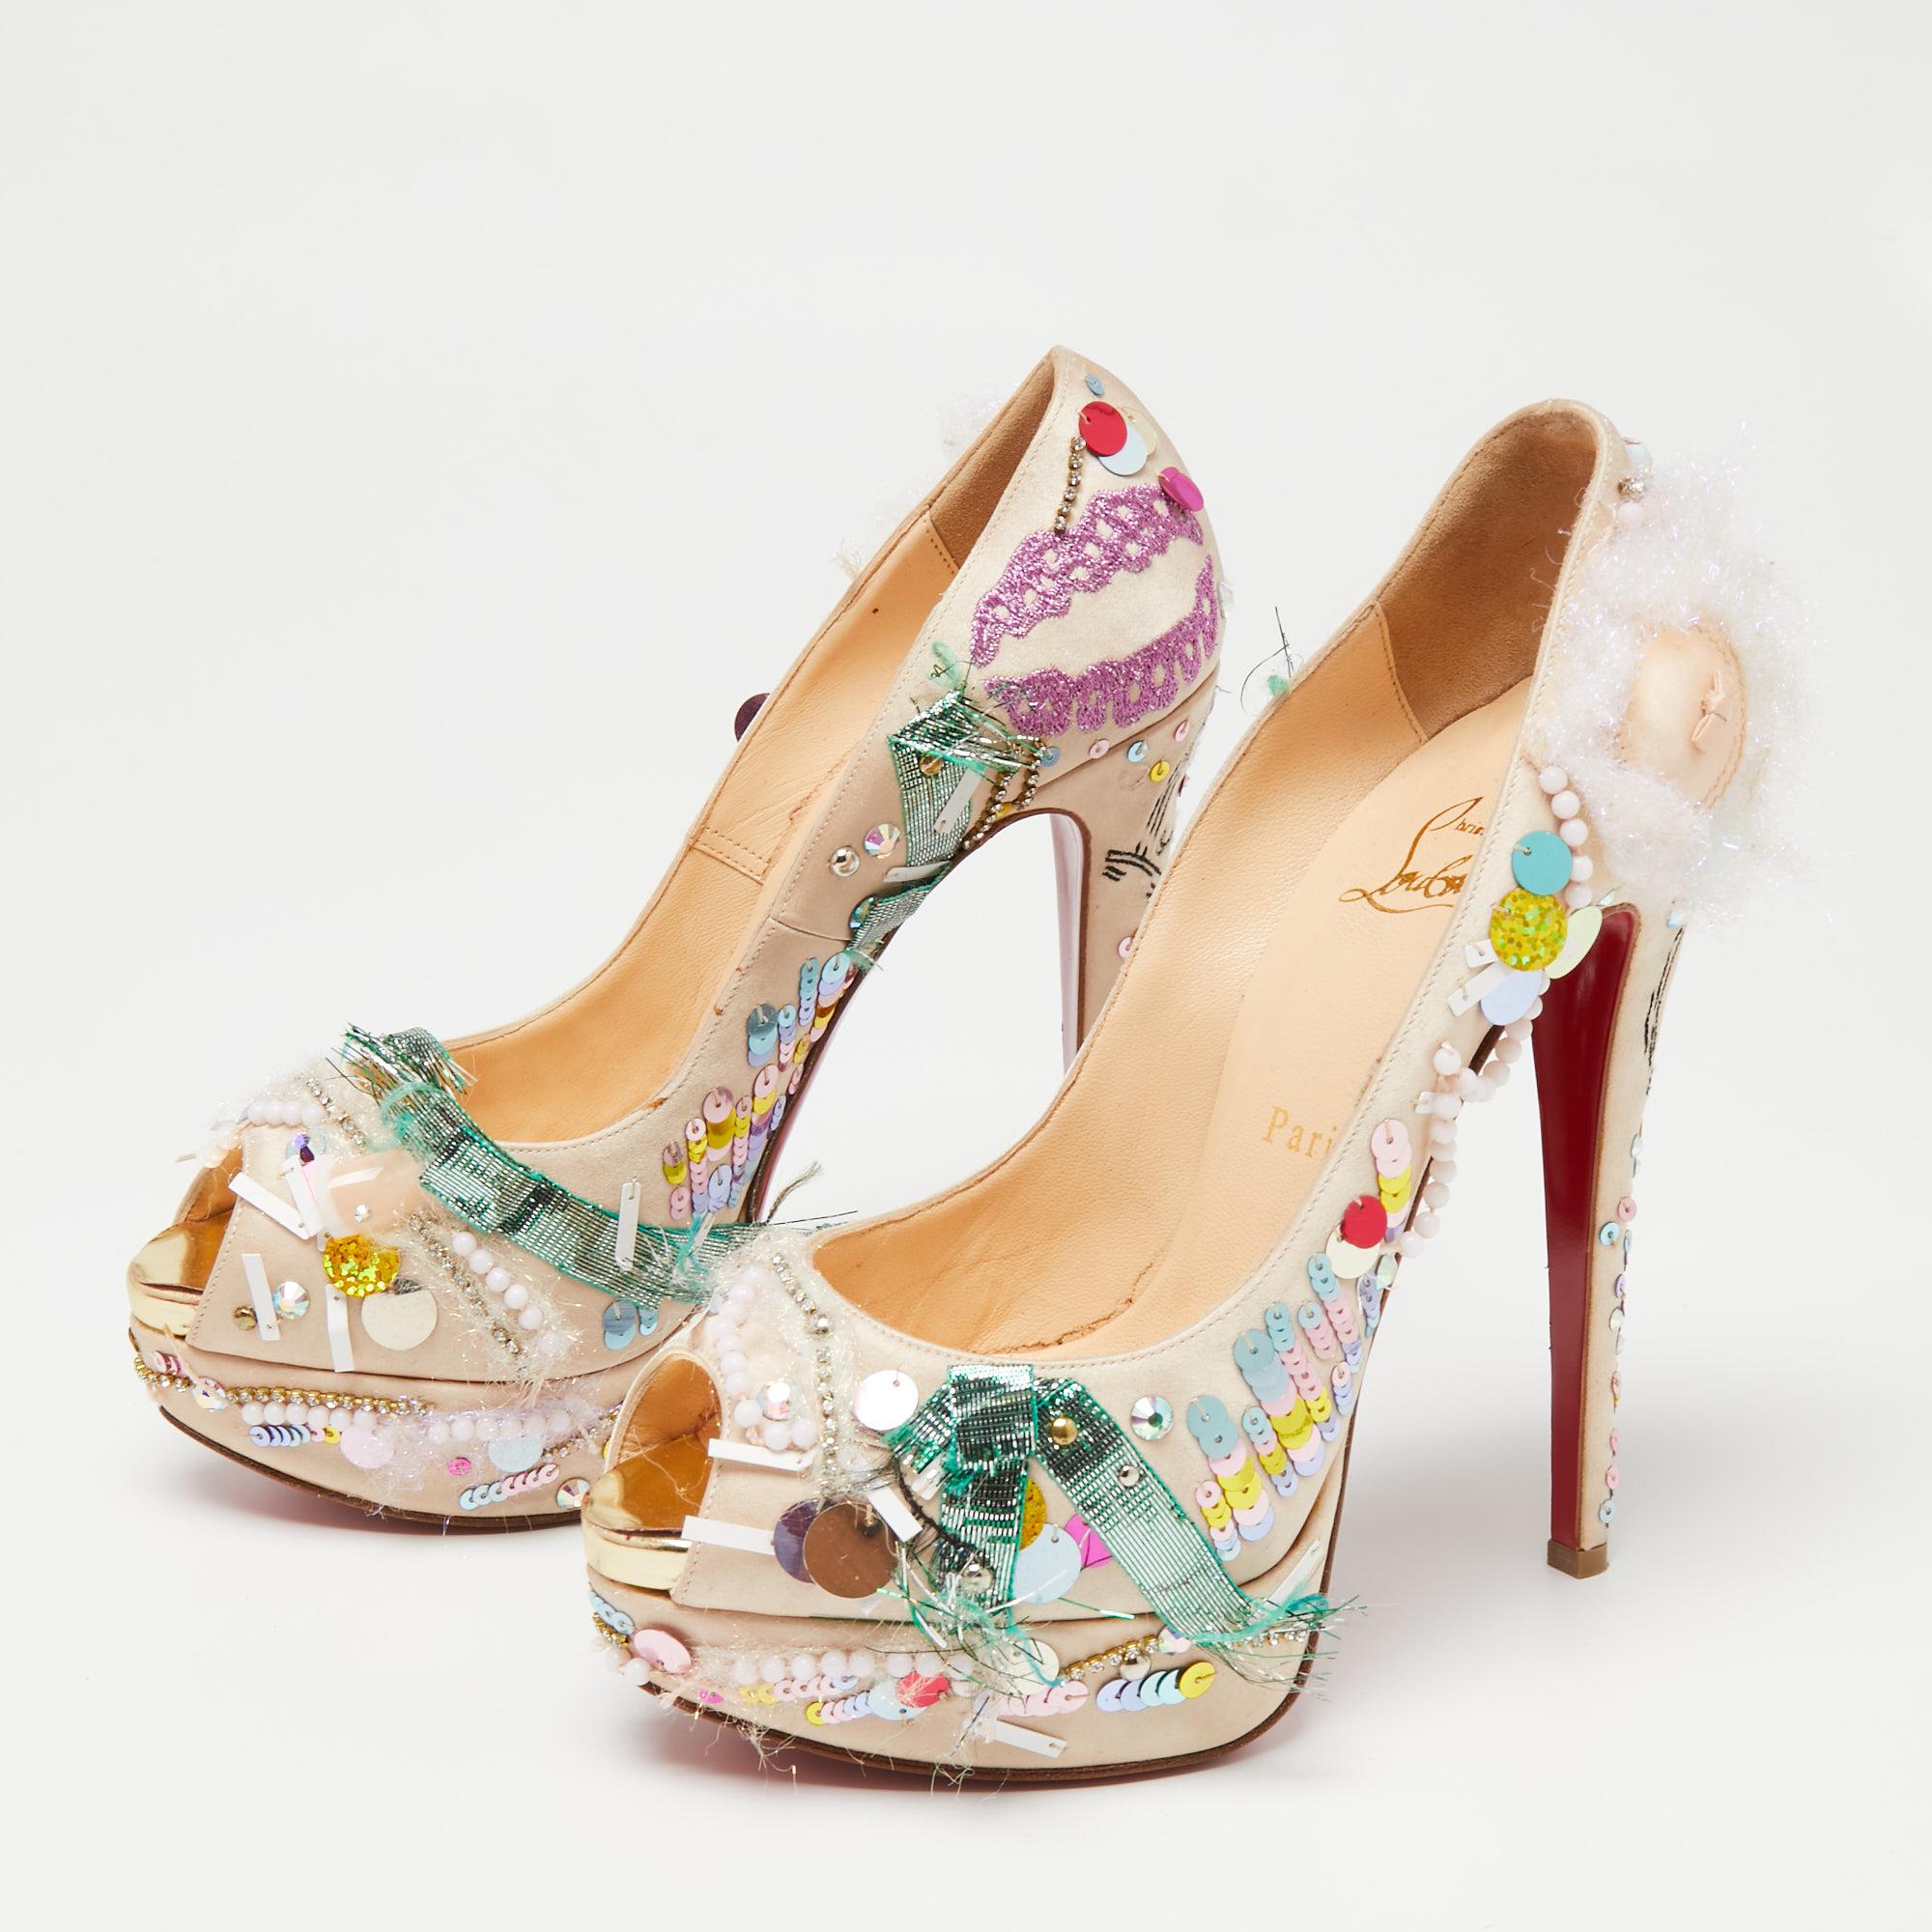 Deliver statement looks with these pumps from Christian Louboutin! From their shape and detailing to their overall appeal, they exude sophisticated style. The pumps come crafted from beige-hued satin and are designed with embellishments, platforms,